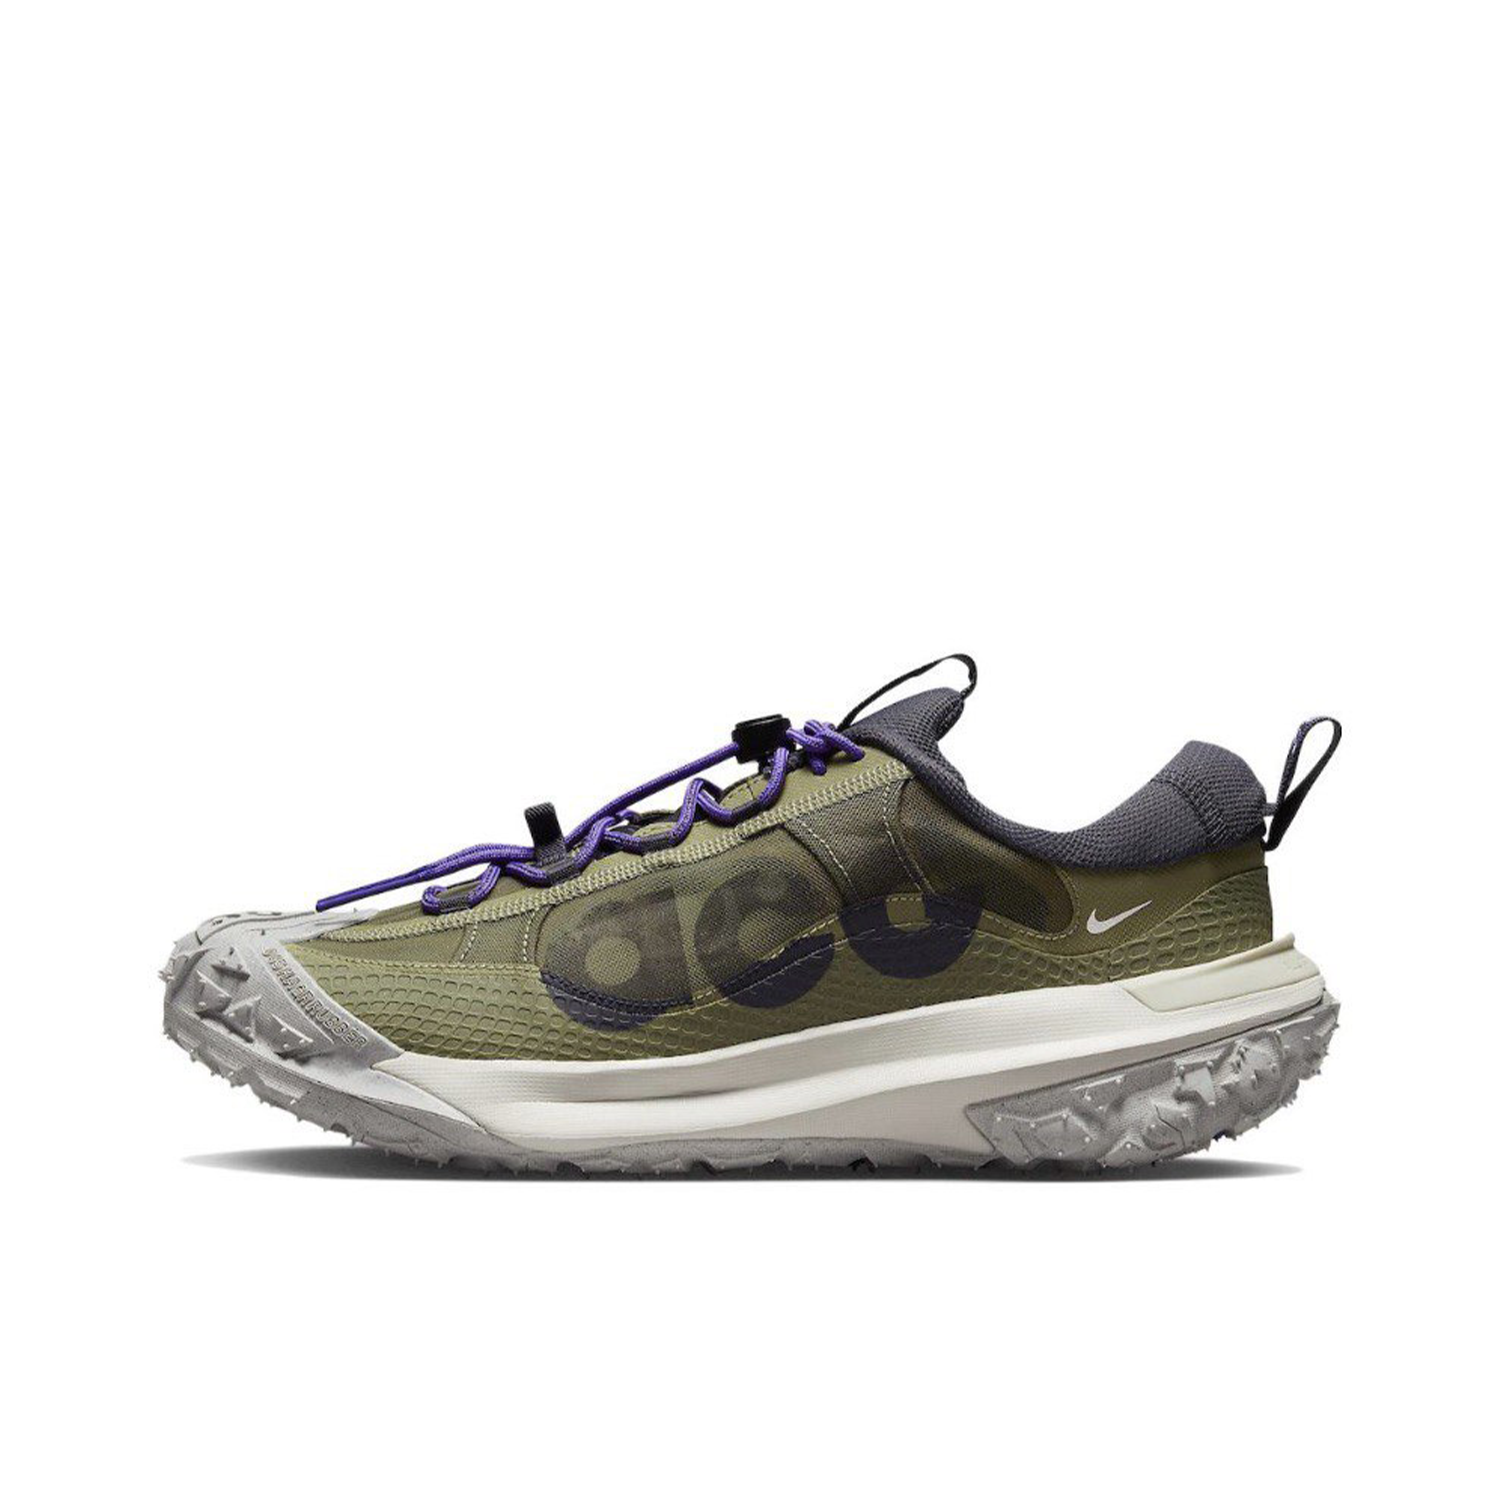 Nike ACG Mountain Fly 2 Low "Natural Olive" (DV7903-200)